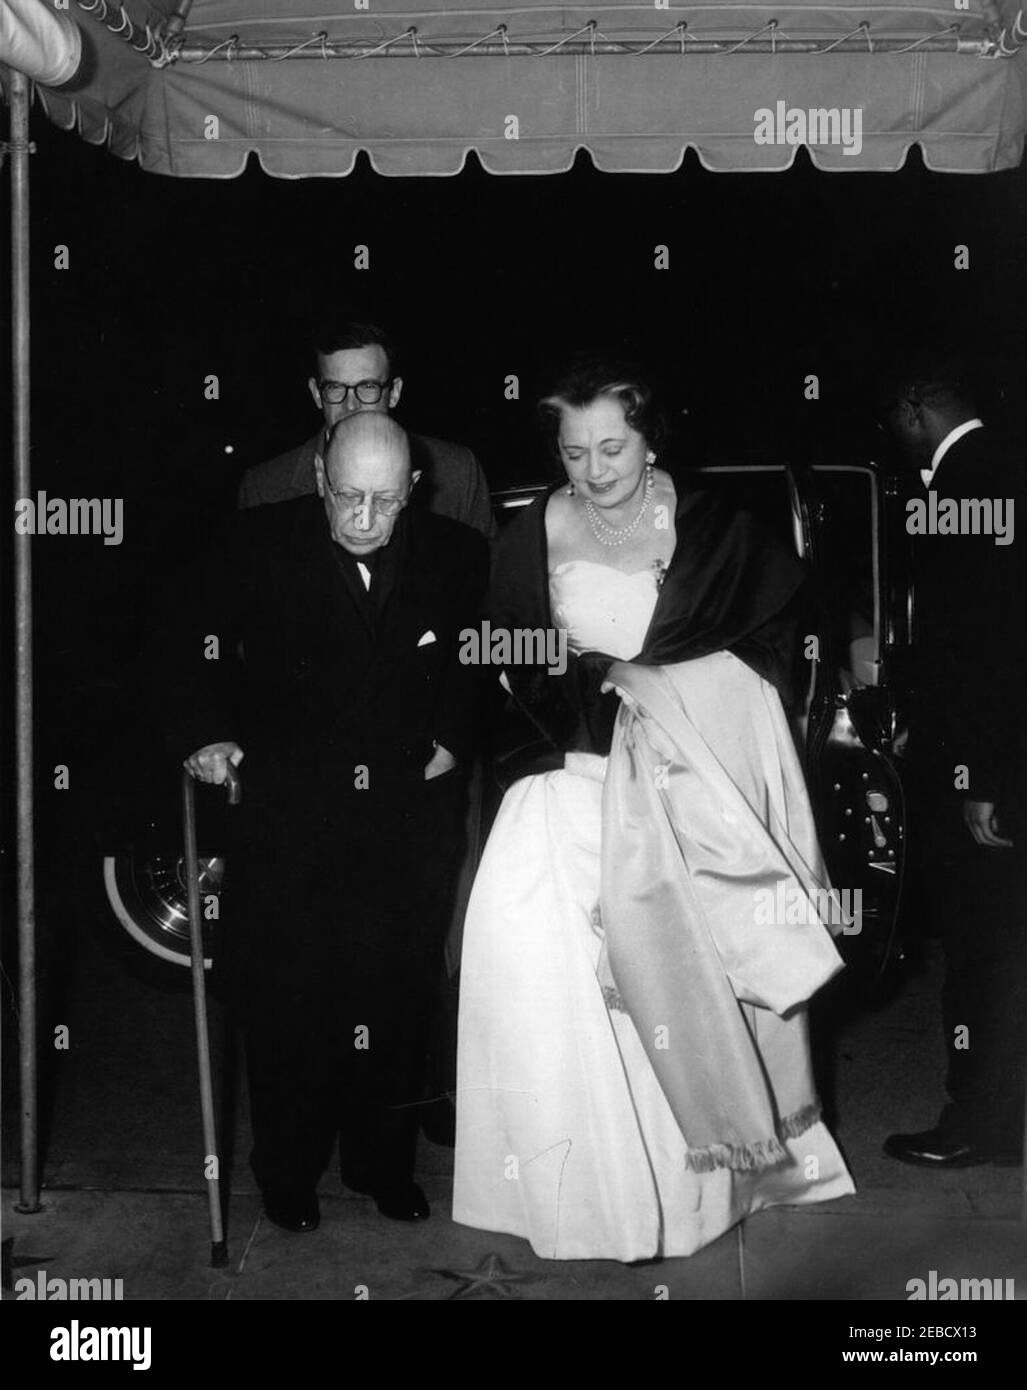 Dinner in honor of Igor Stravinsky, 8:00PM. Composer Igor Stravinsky and his wife Vera de Bosset Stravinsky arrive for a dinner party at the White House, Washington, D.C. Stock Photo